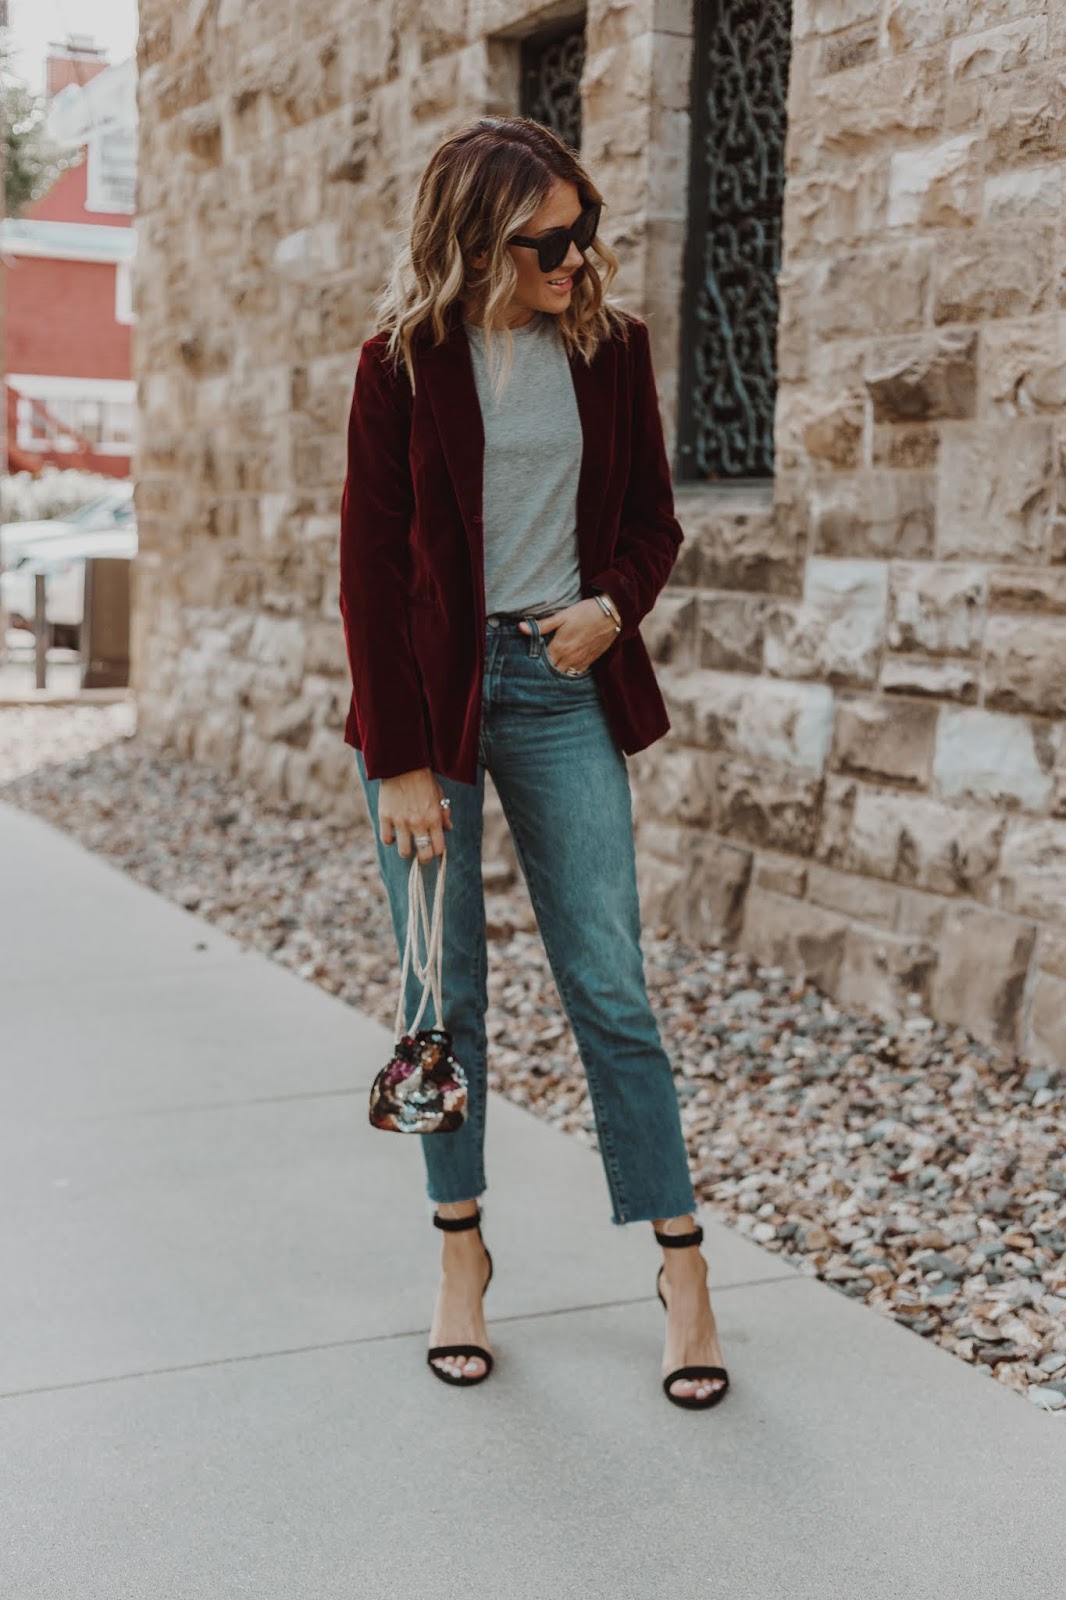 Velvet pants outfit for New Years Eve dinner. Outfit ideas. : r/OUTFITS